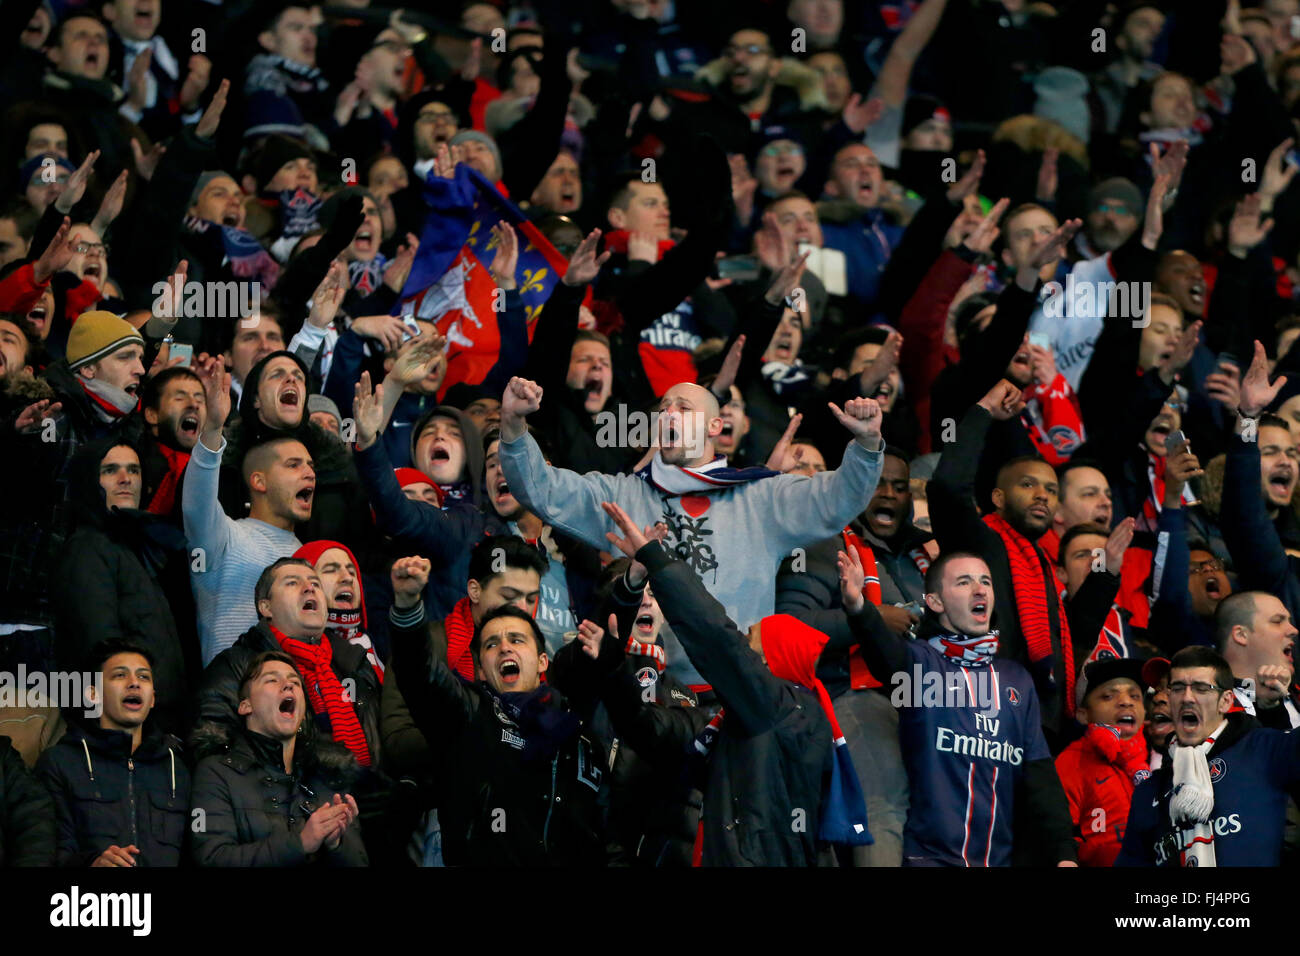 PSG fans singing during the UEFA Champions League round of 16 match between Paris Saint-Germain and Chelsea at the Parc des Princes Stadium in Paris. February 16, 2016. James Boardman / Telephoto Images +44 7967 642437 Stock Photo